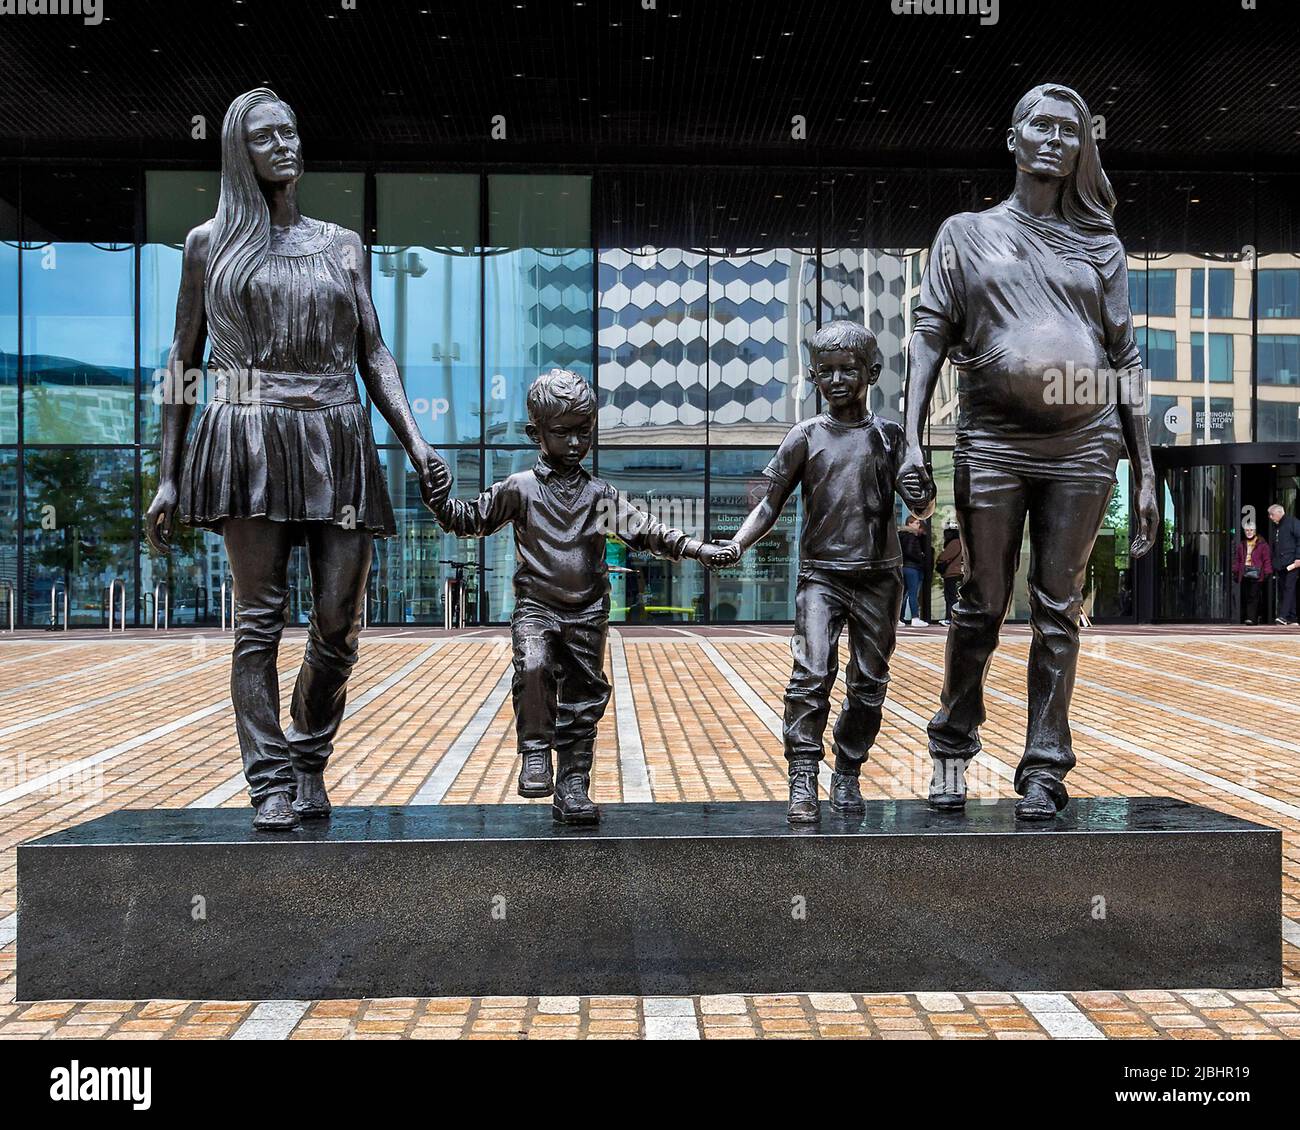 A Real Birmingham family is a bronze statue by artist Gillian Wearing. It conveys the idea that what constitutes a family isn't fixed. Stock Photo